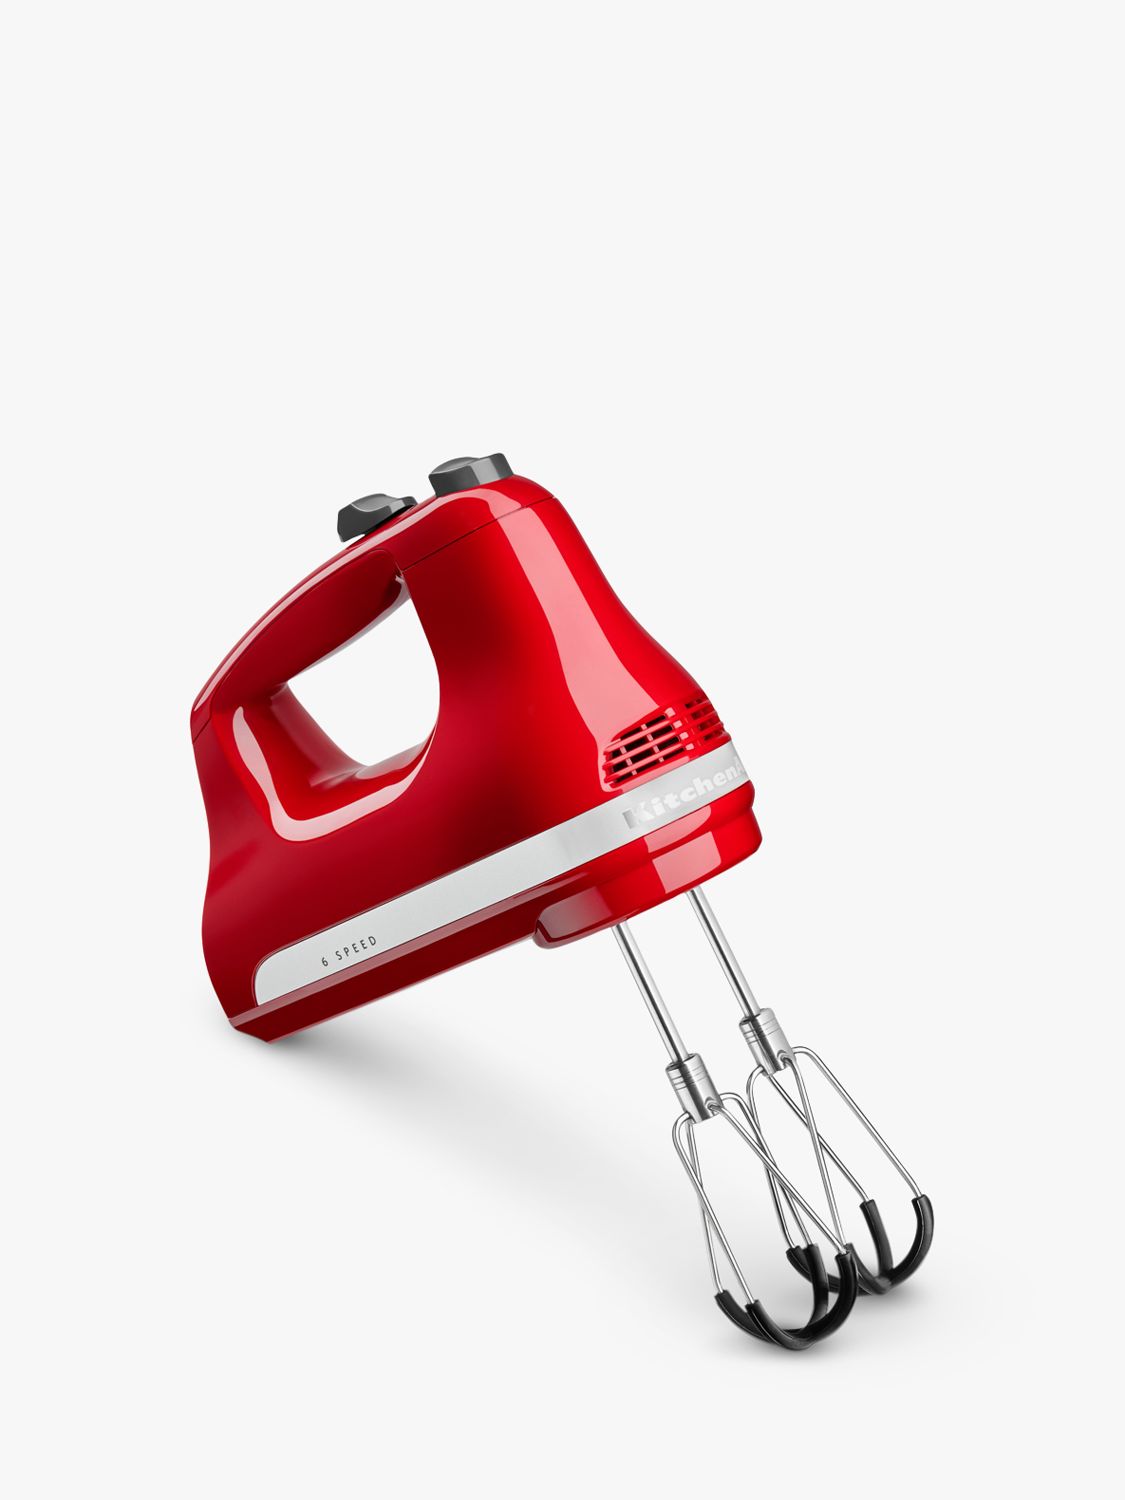 Electric Whisk